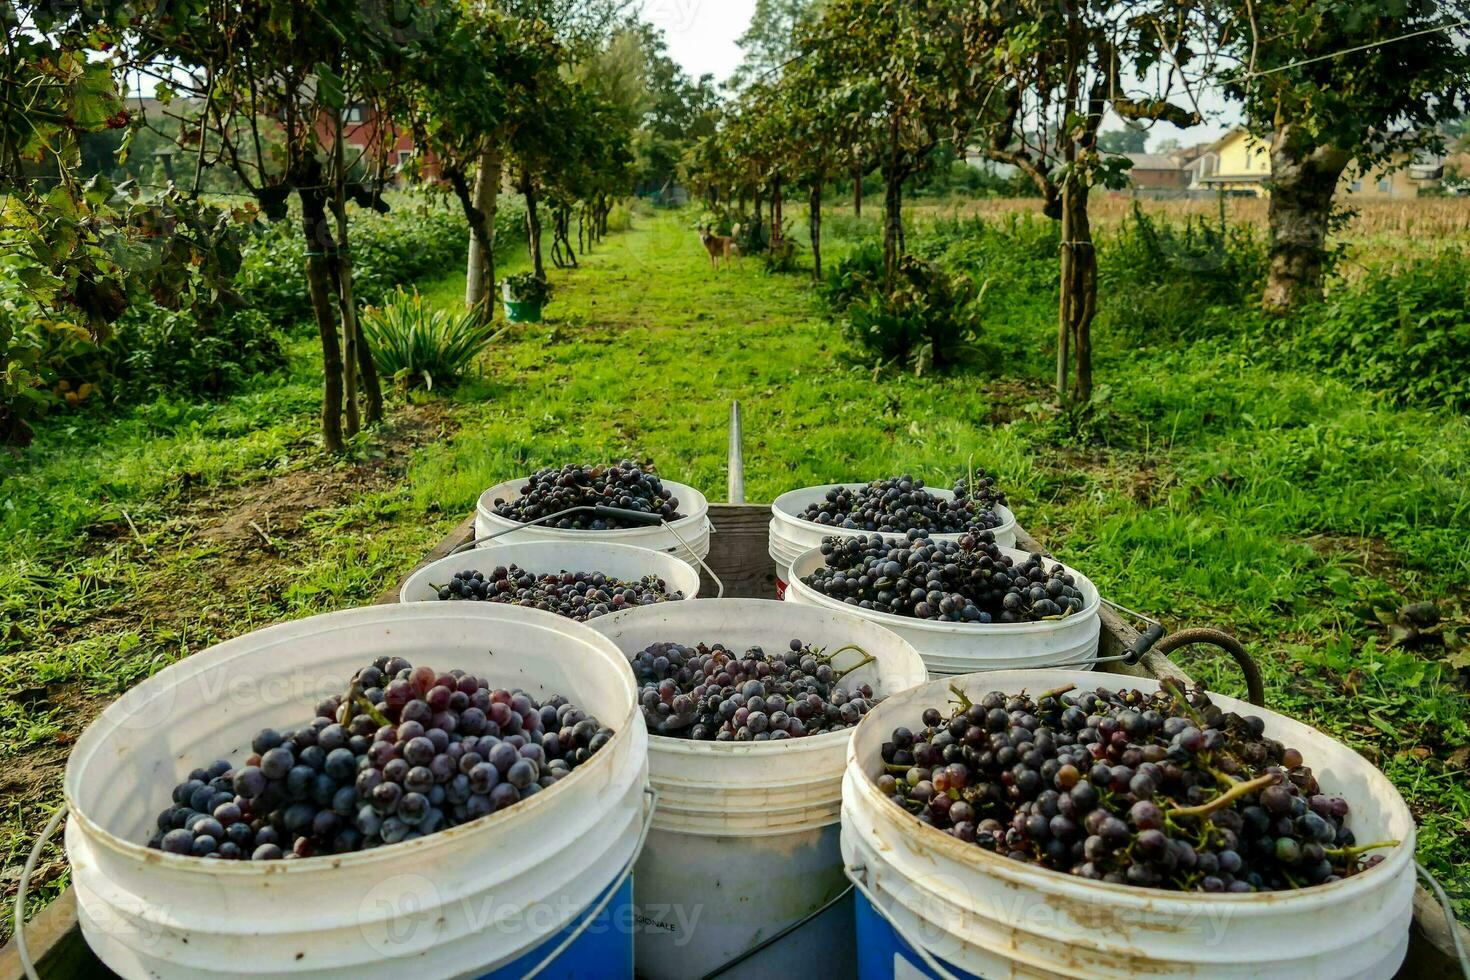 buckets of grapes are loaded into a truck photo